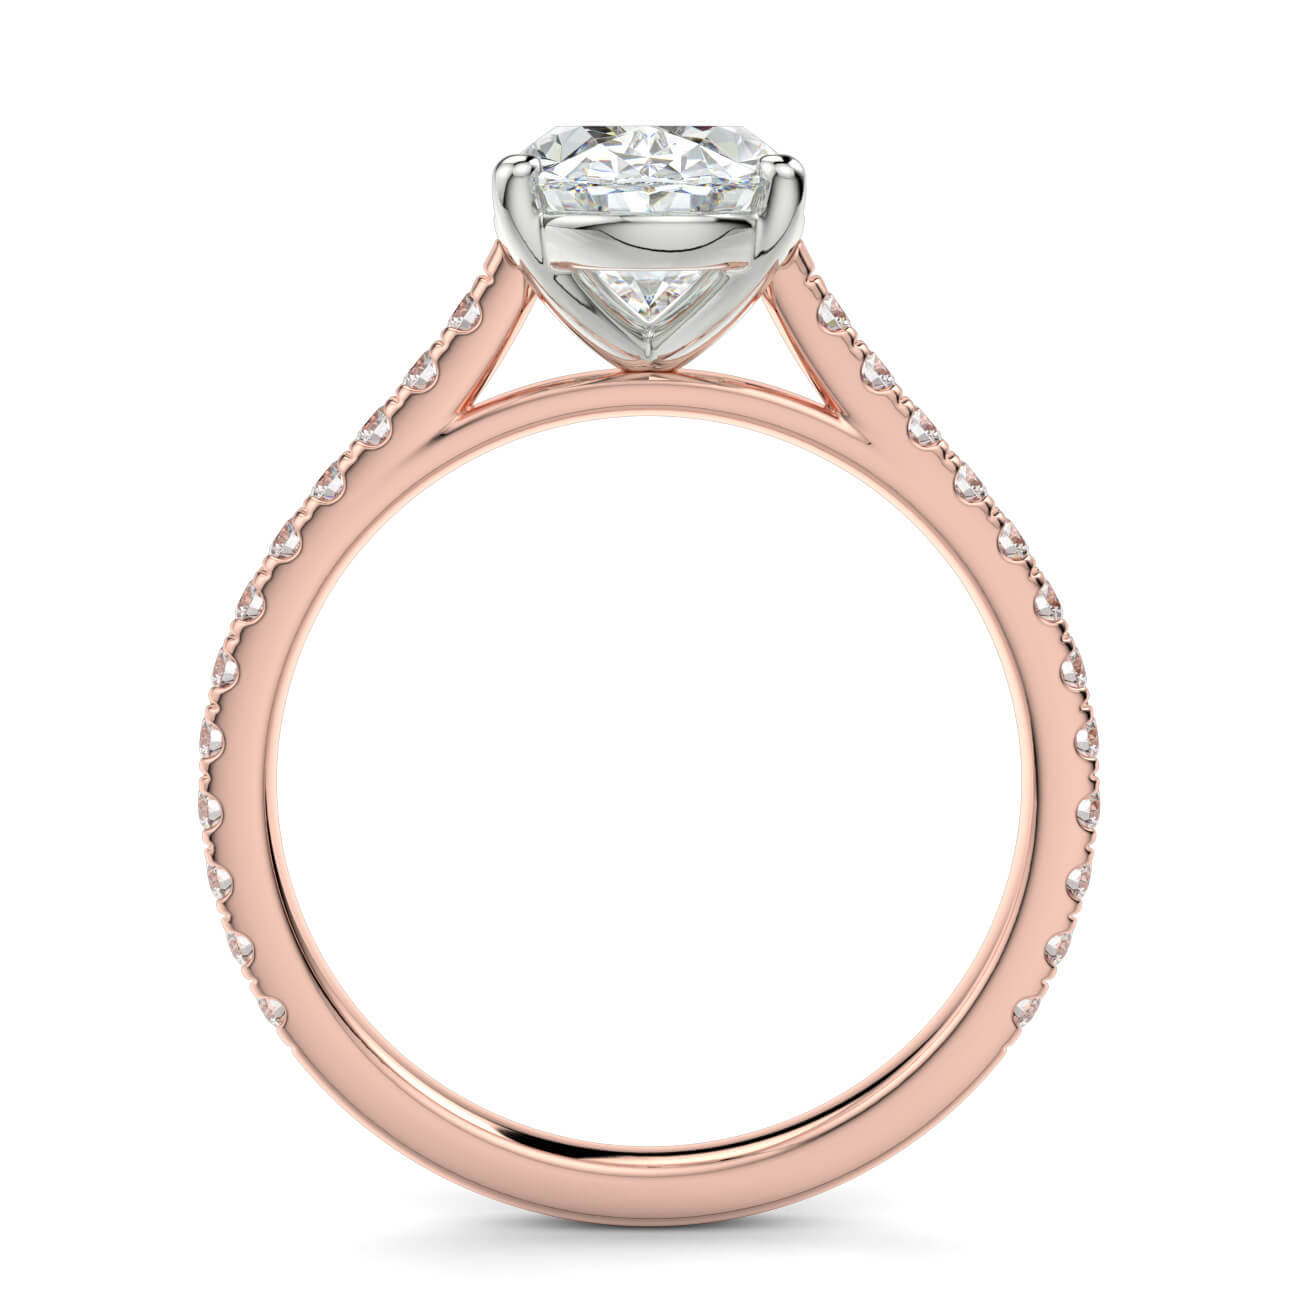 Oval shape diamond cathedral engagement ring in rose and white gold – Australian Diamond Network